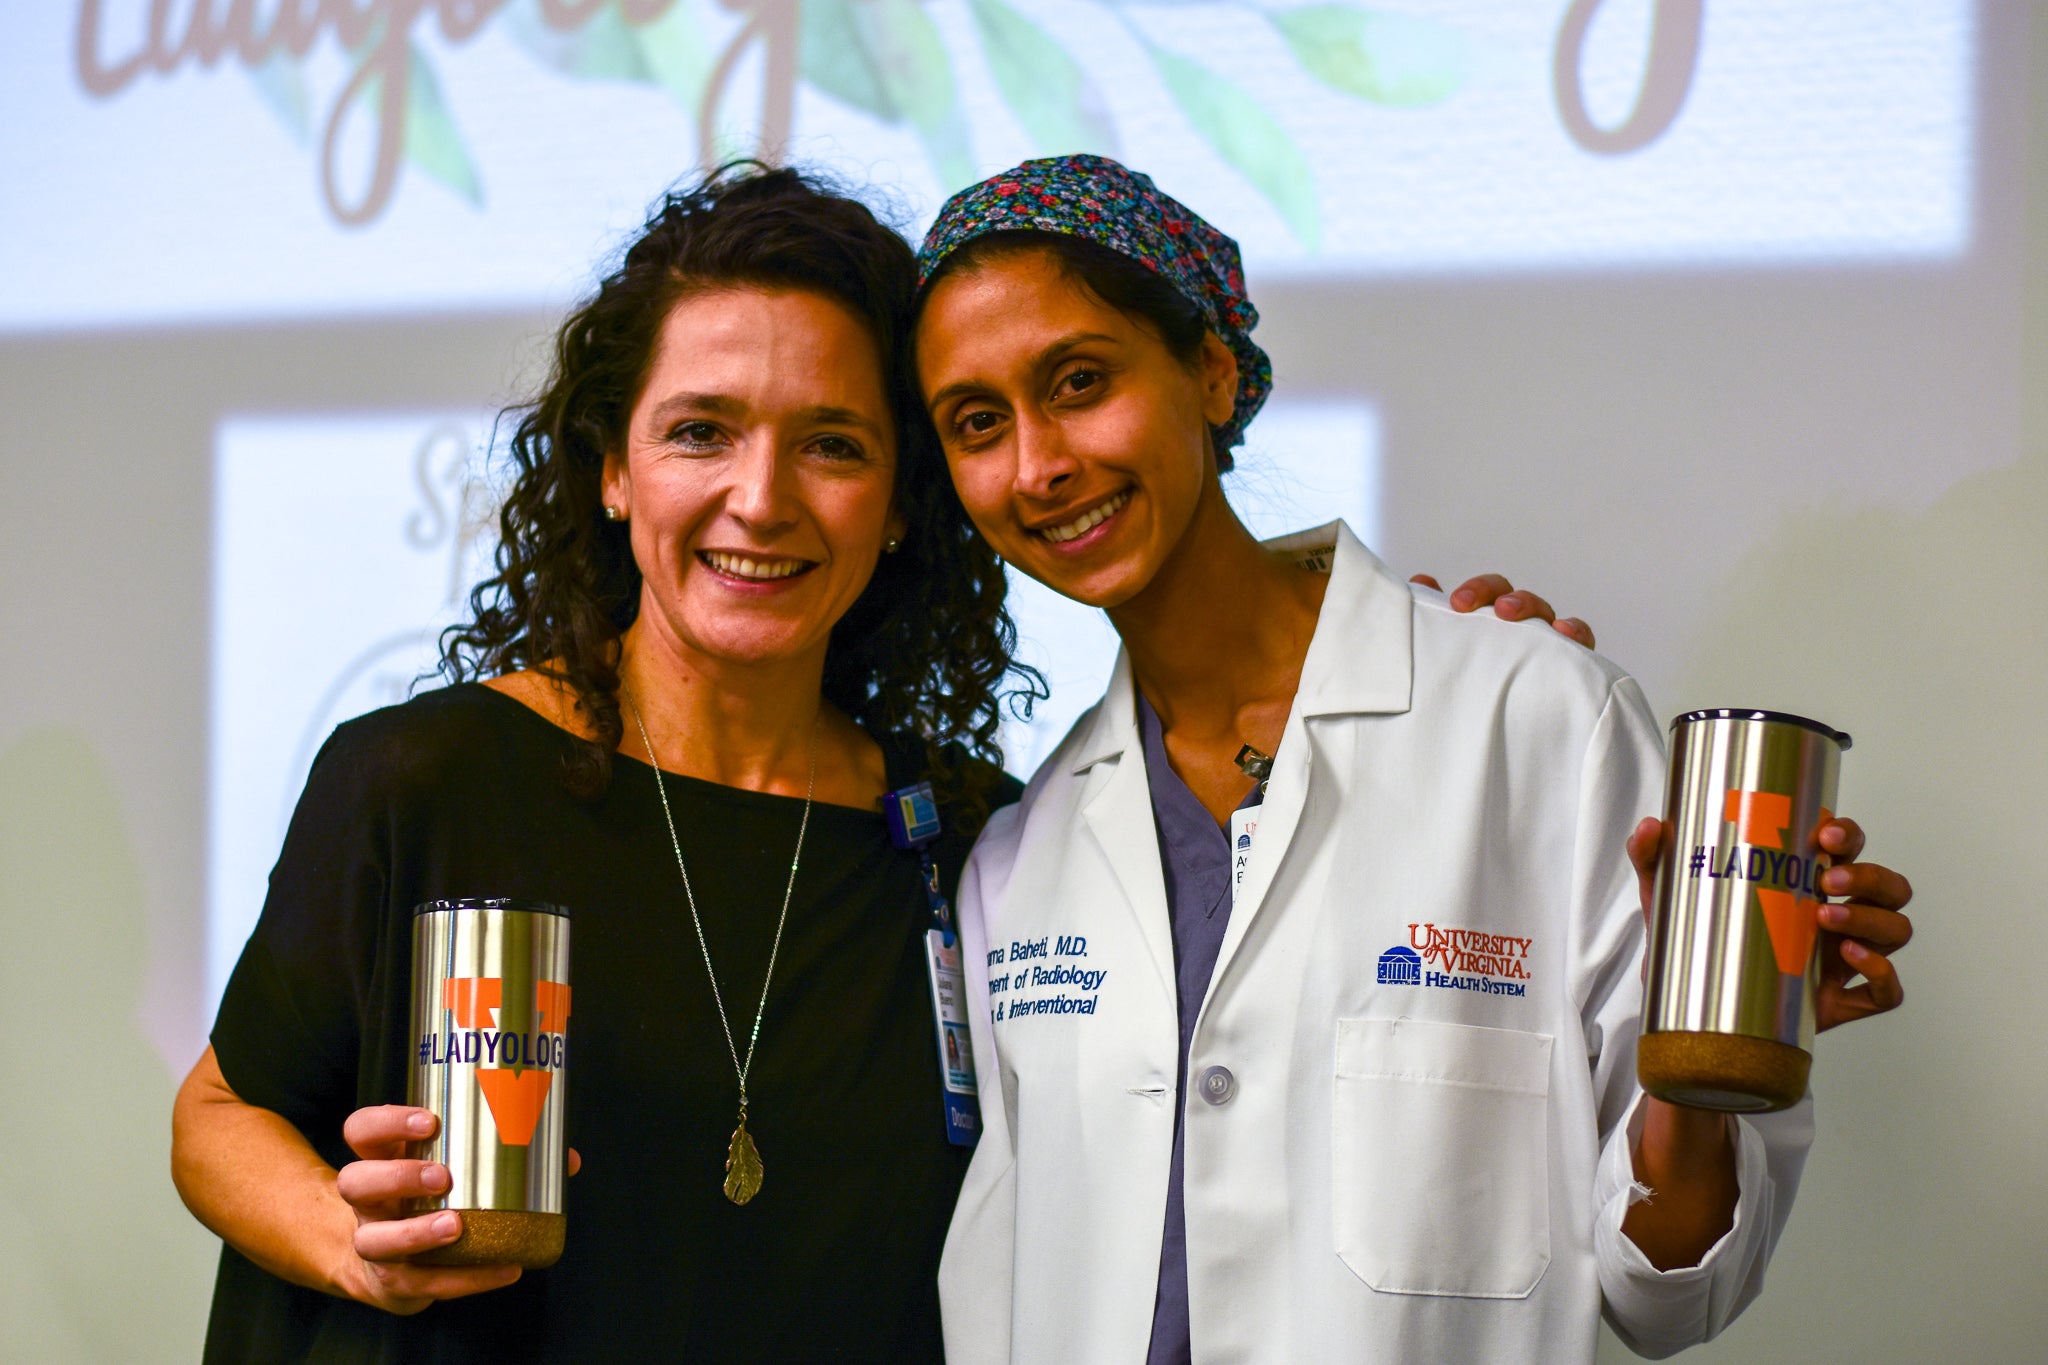 UVA Radiology's Director of ladyologist events with ladyologist cup